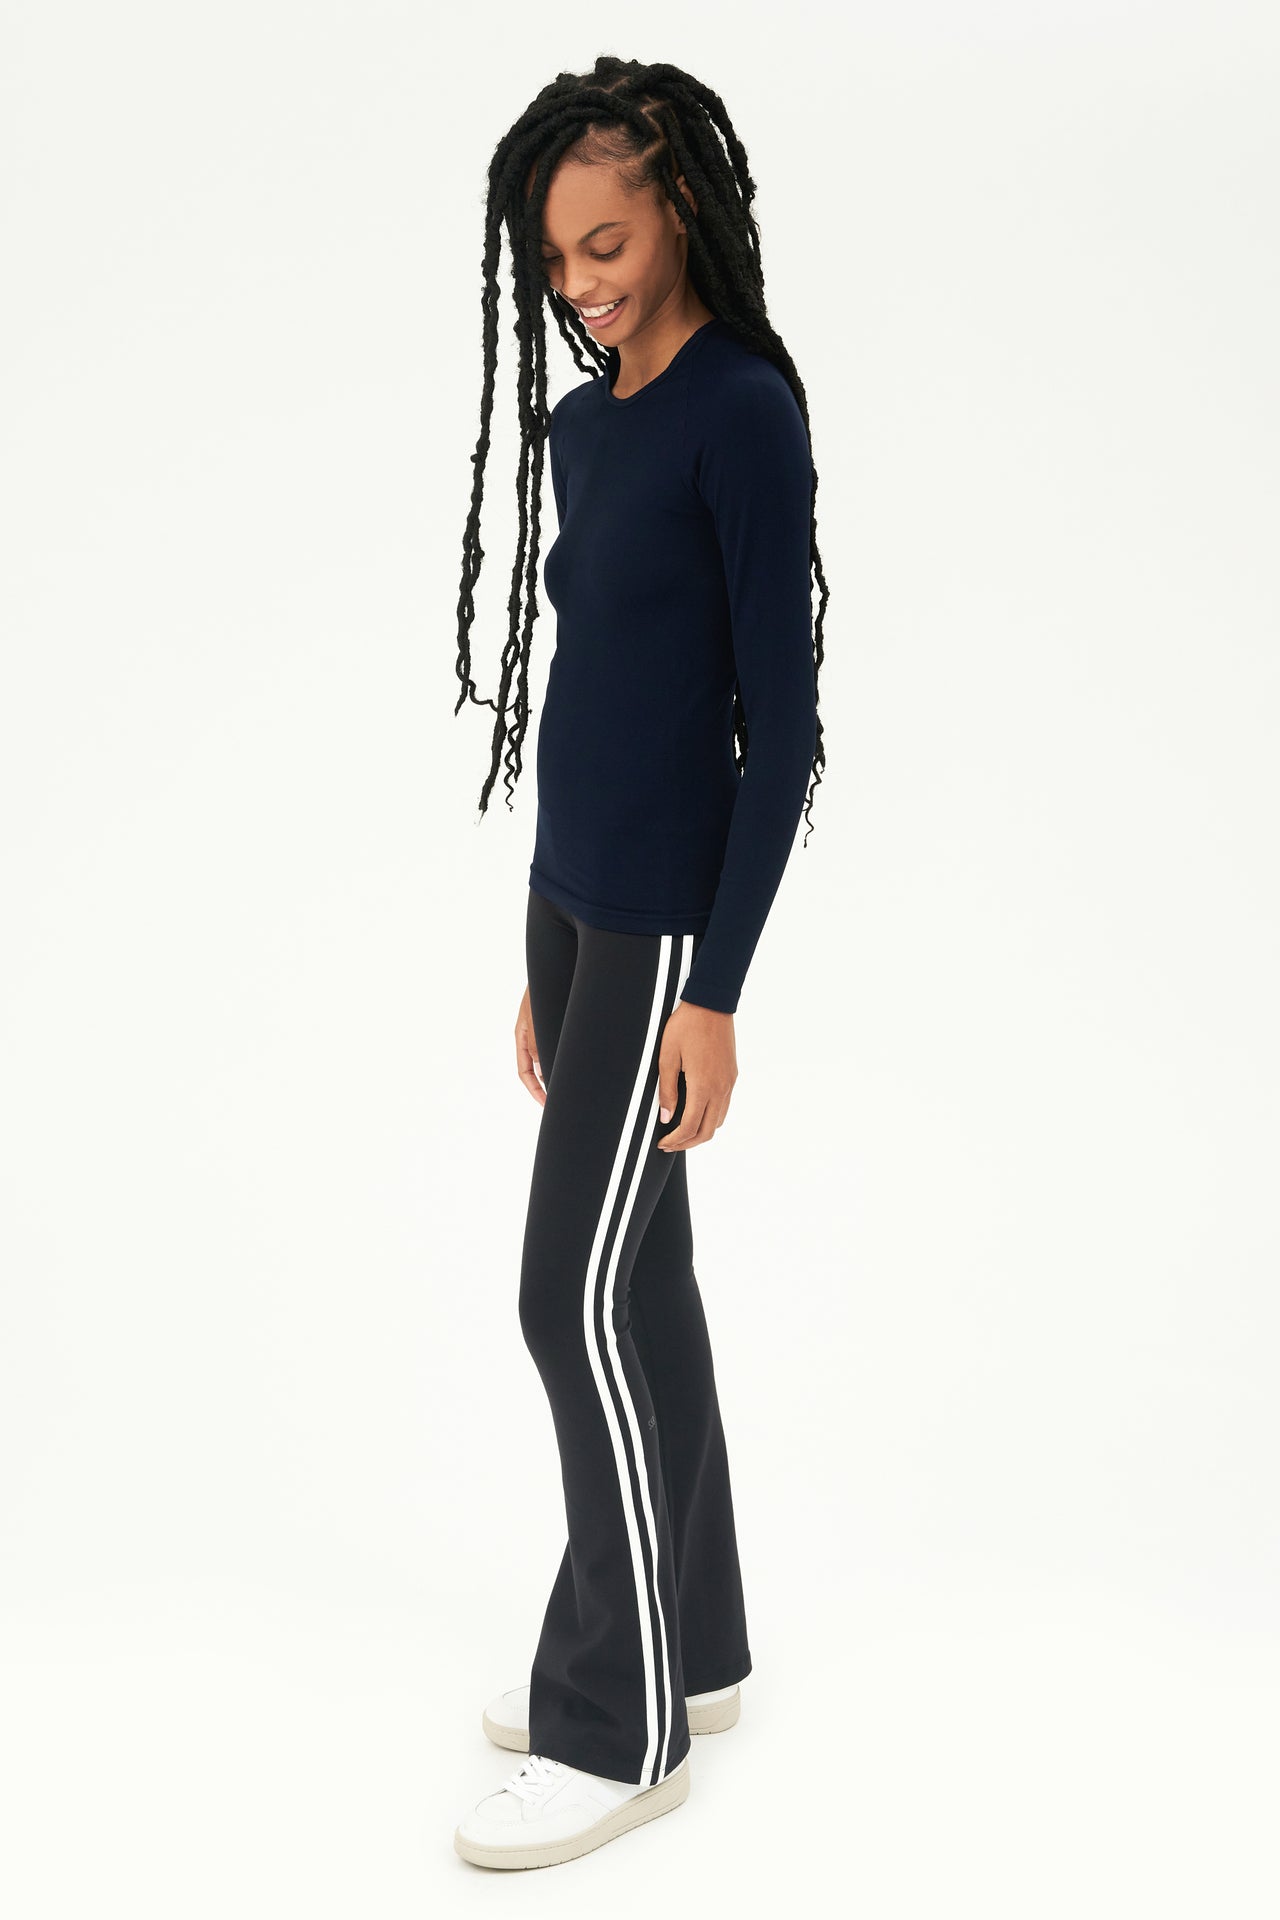 A young woman wearing a SPLITS59 Loren Seamless L/S Tee in Indigo and black pants.